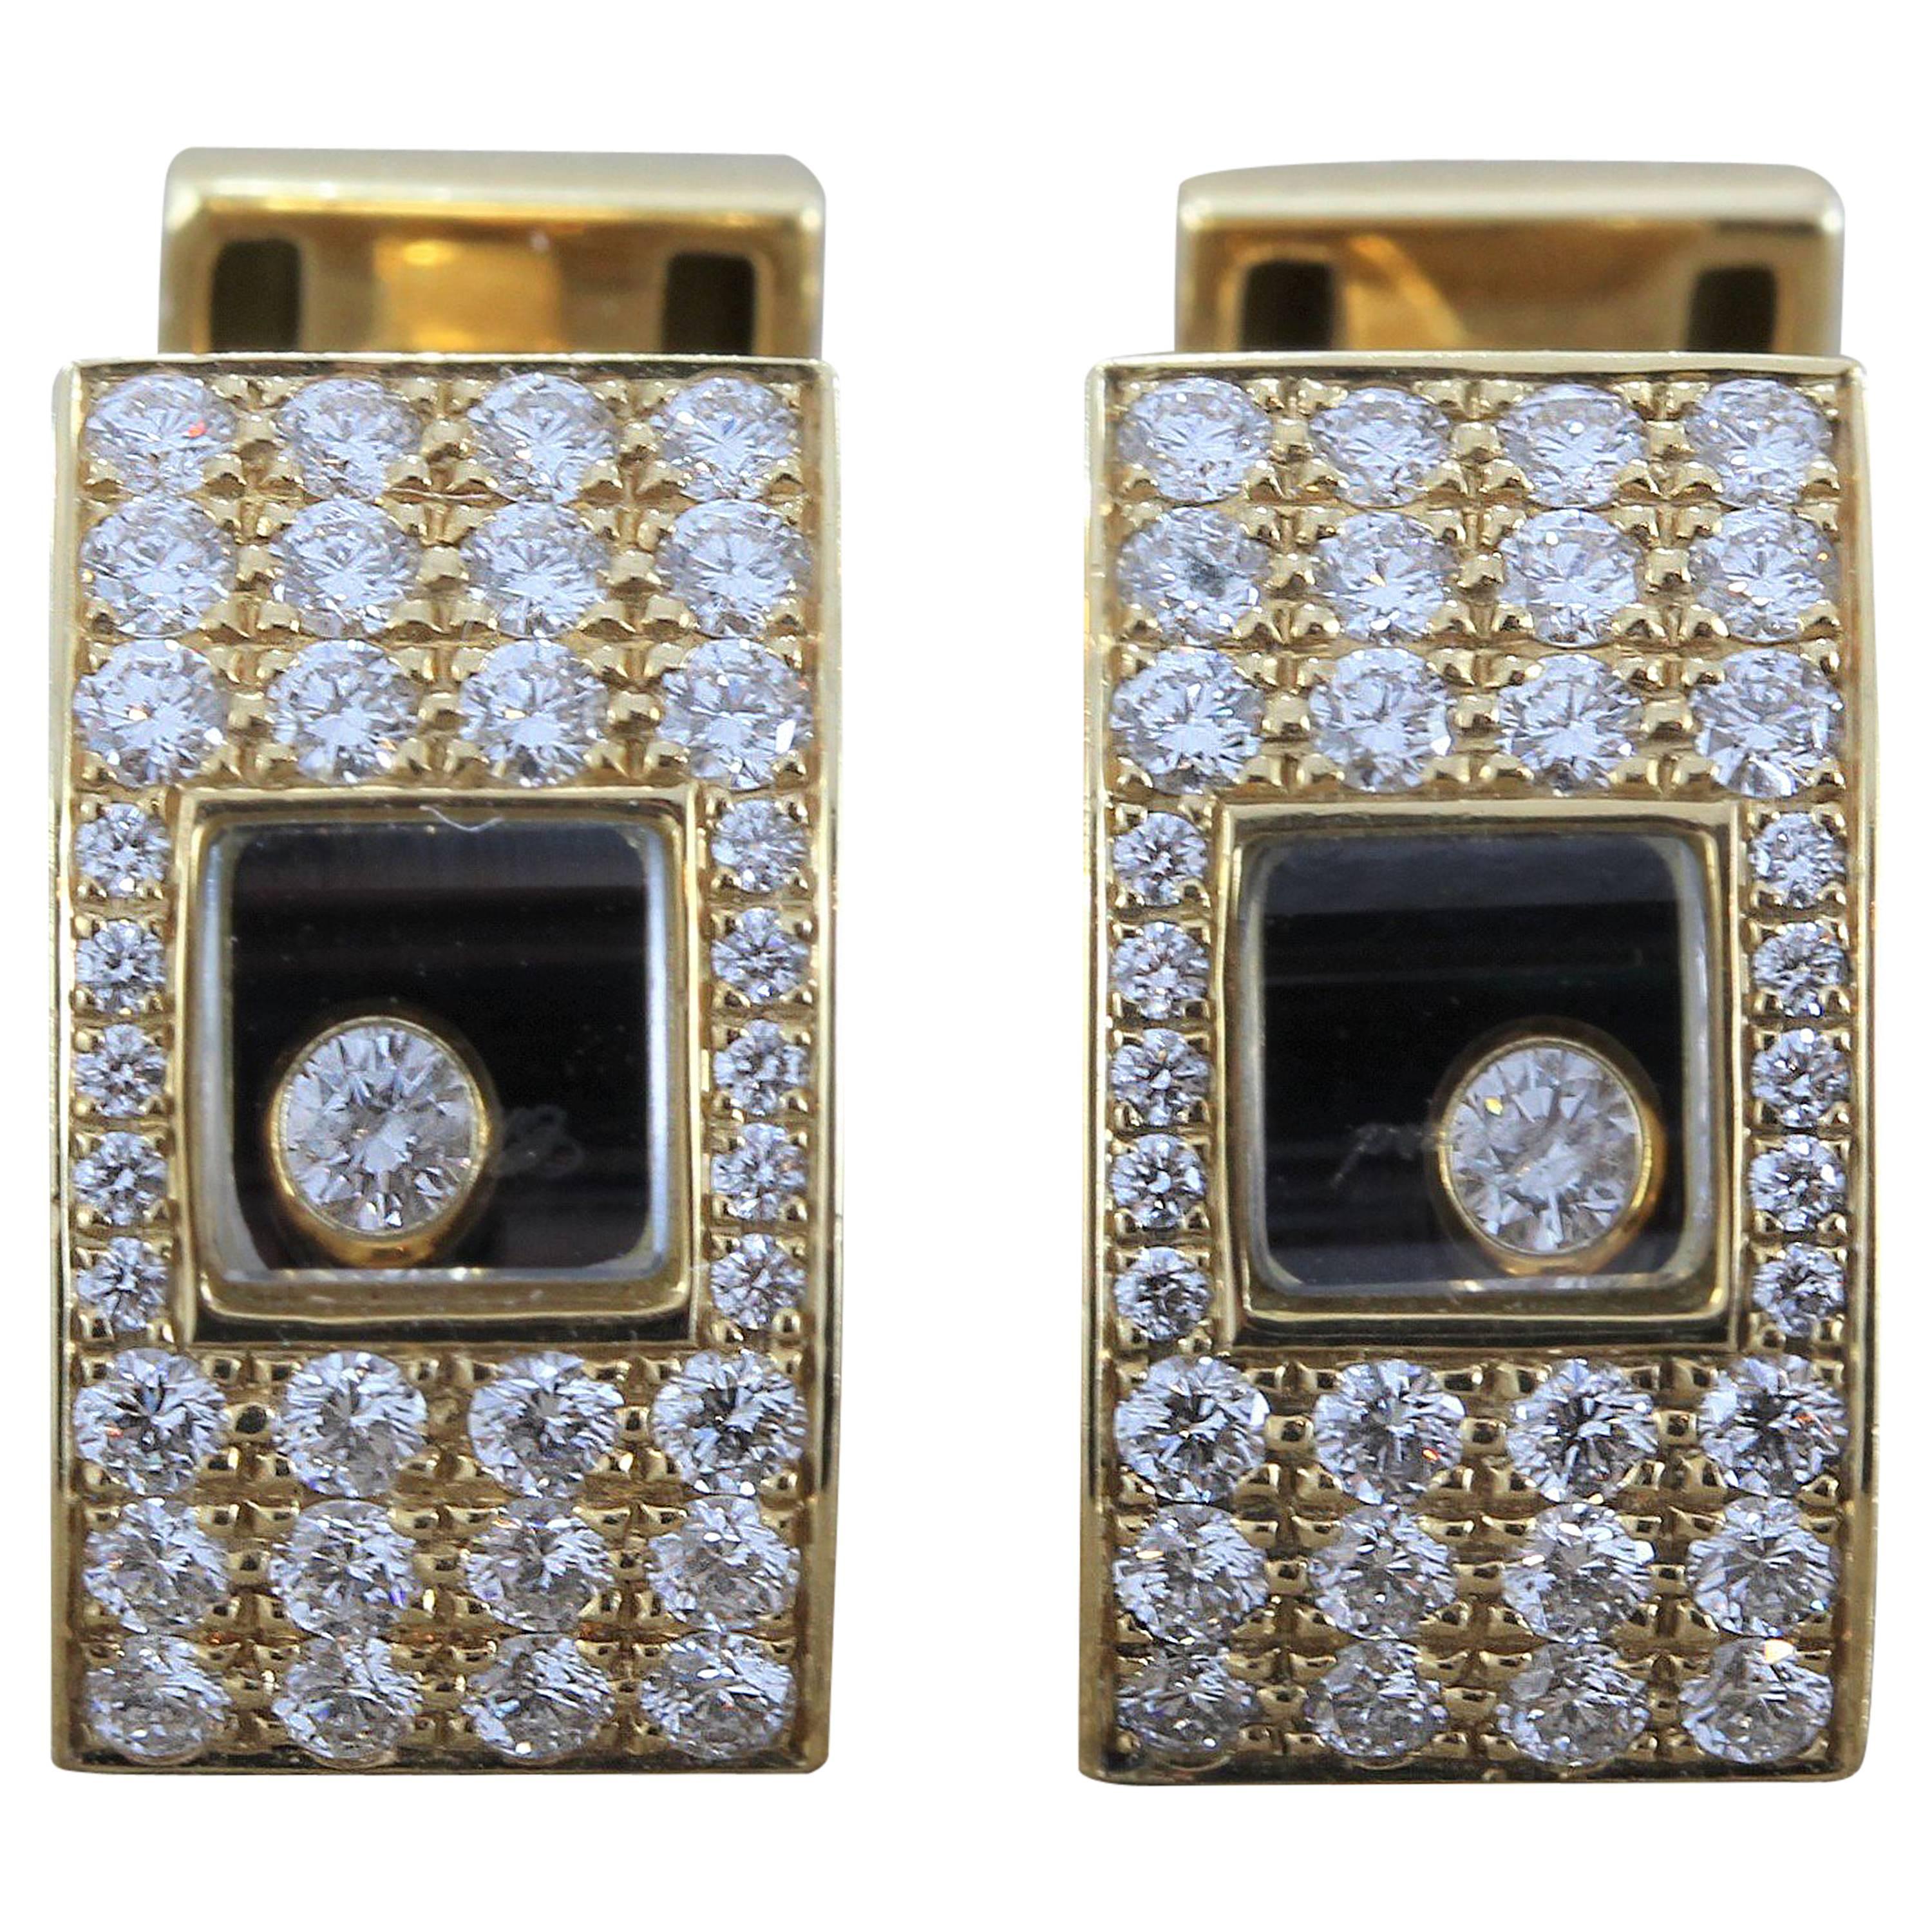 Chopard presents a pair of 18K yellow gold cufflinks featuring 1.25 carats of round cut diamonds bordering a glass frame with a single happy diamond inside.